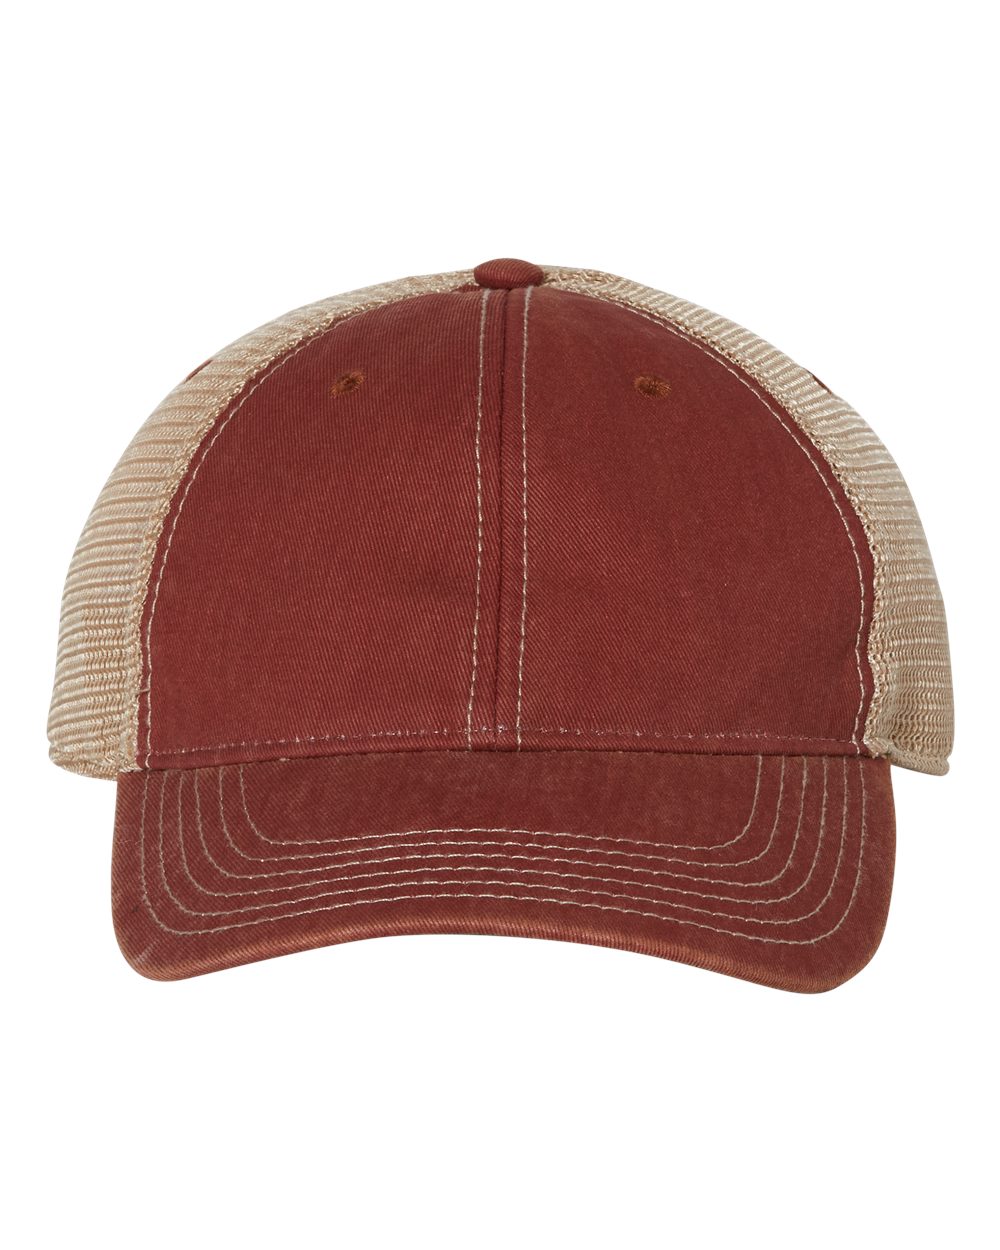 Front view of LEGACY OFA custom hat in cardinal and khaki